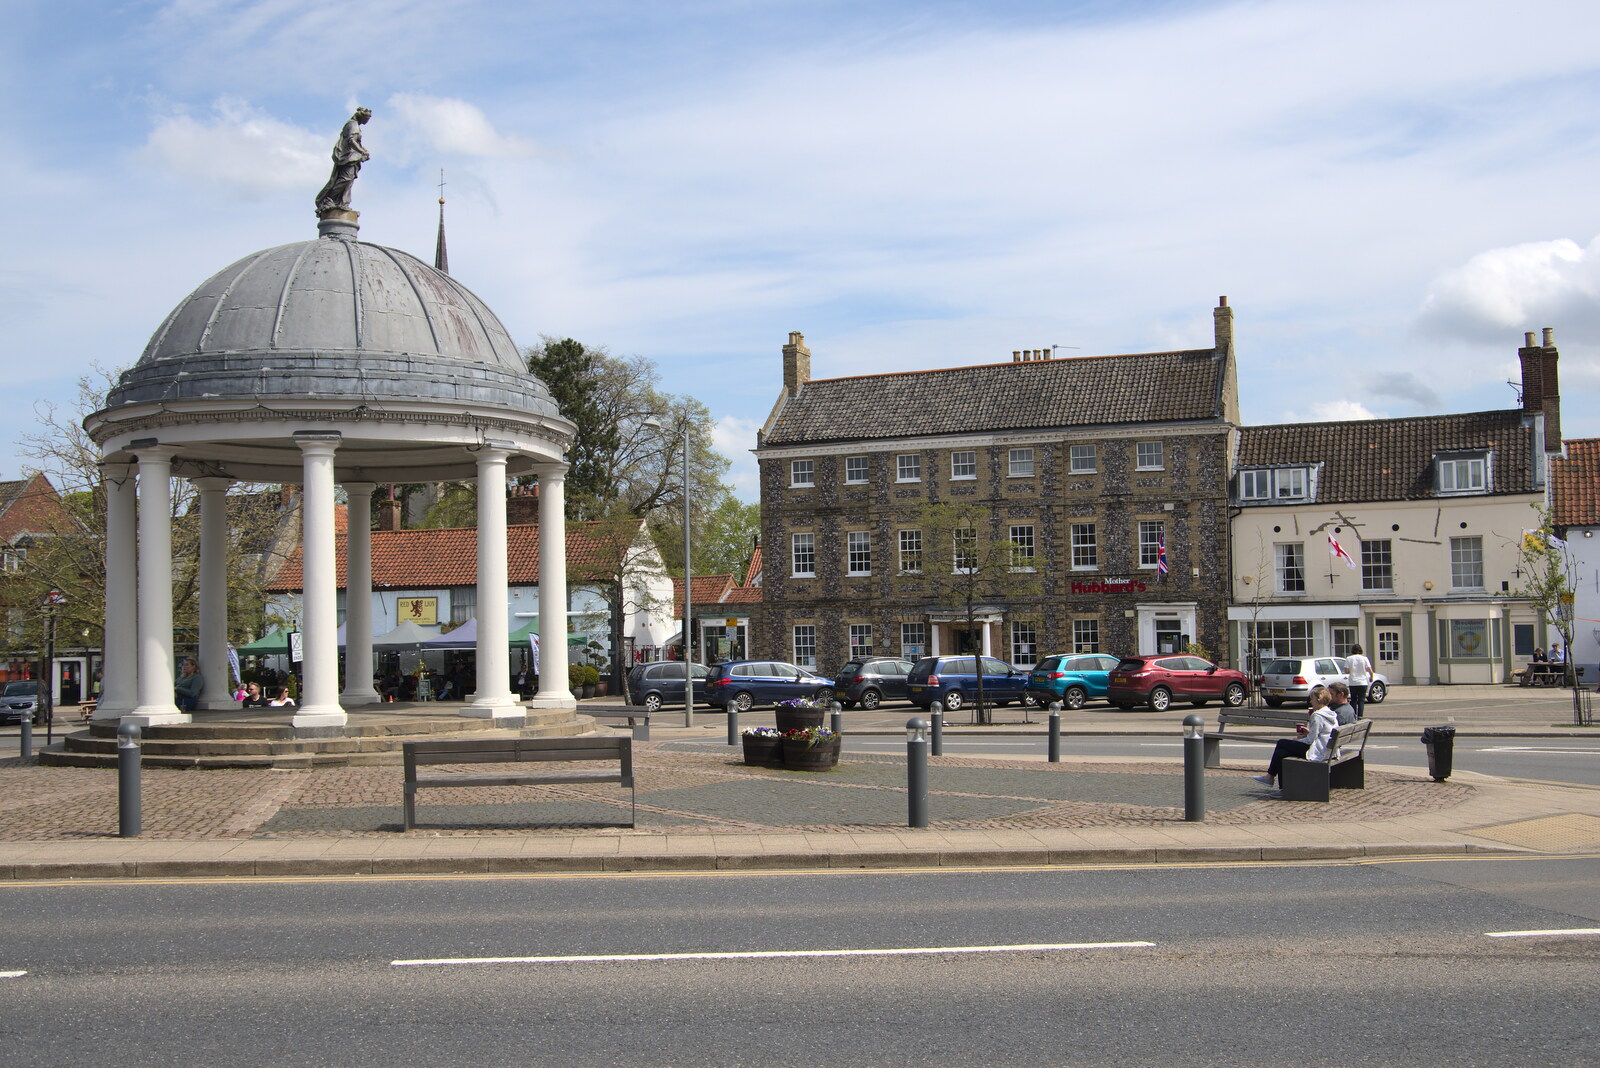 The Buttercross on the market place from A Vaccination Afternoon, Swaffham, Norfolk - 9th May 2021